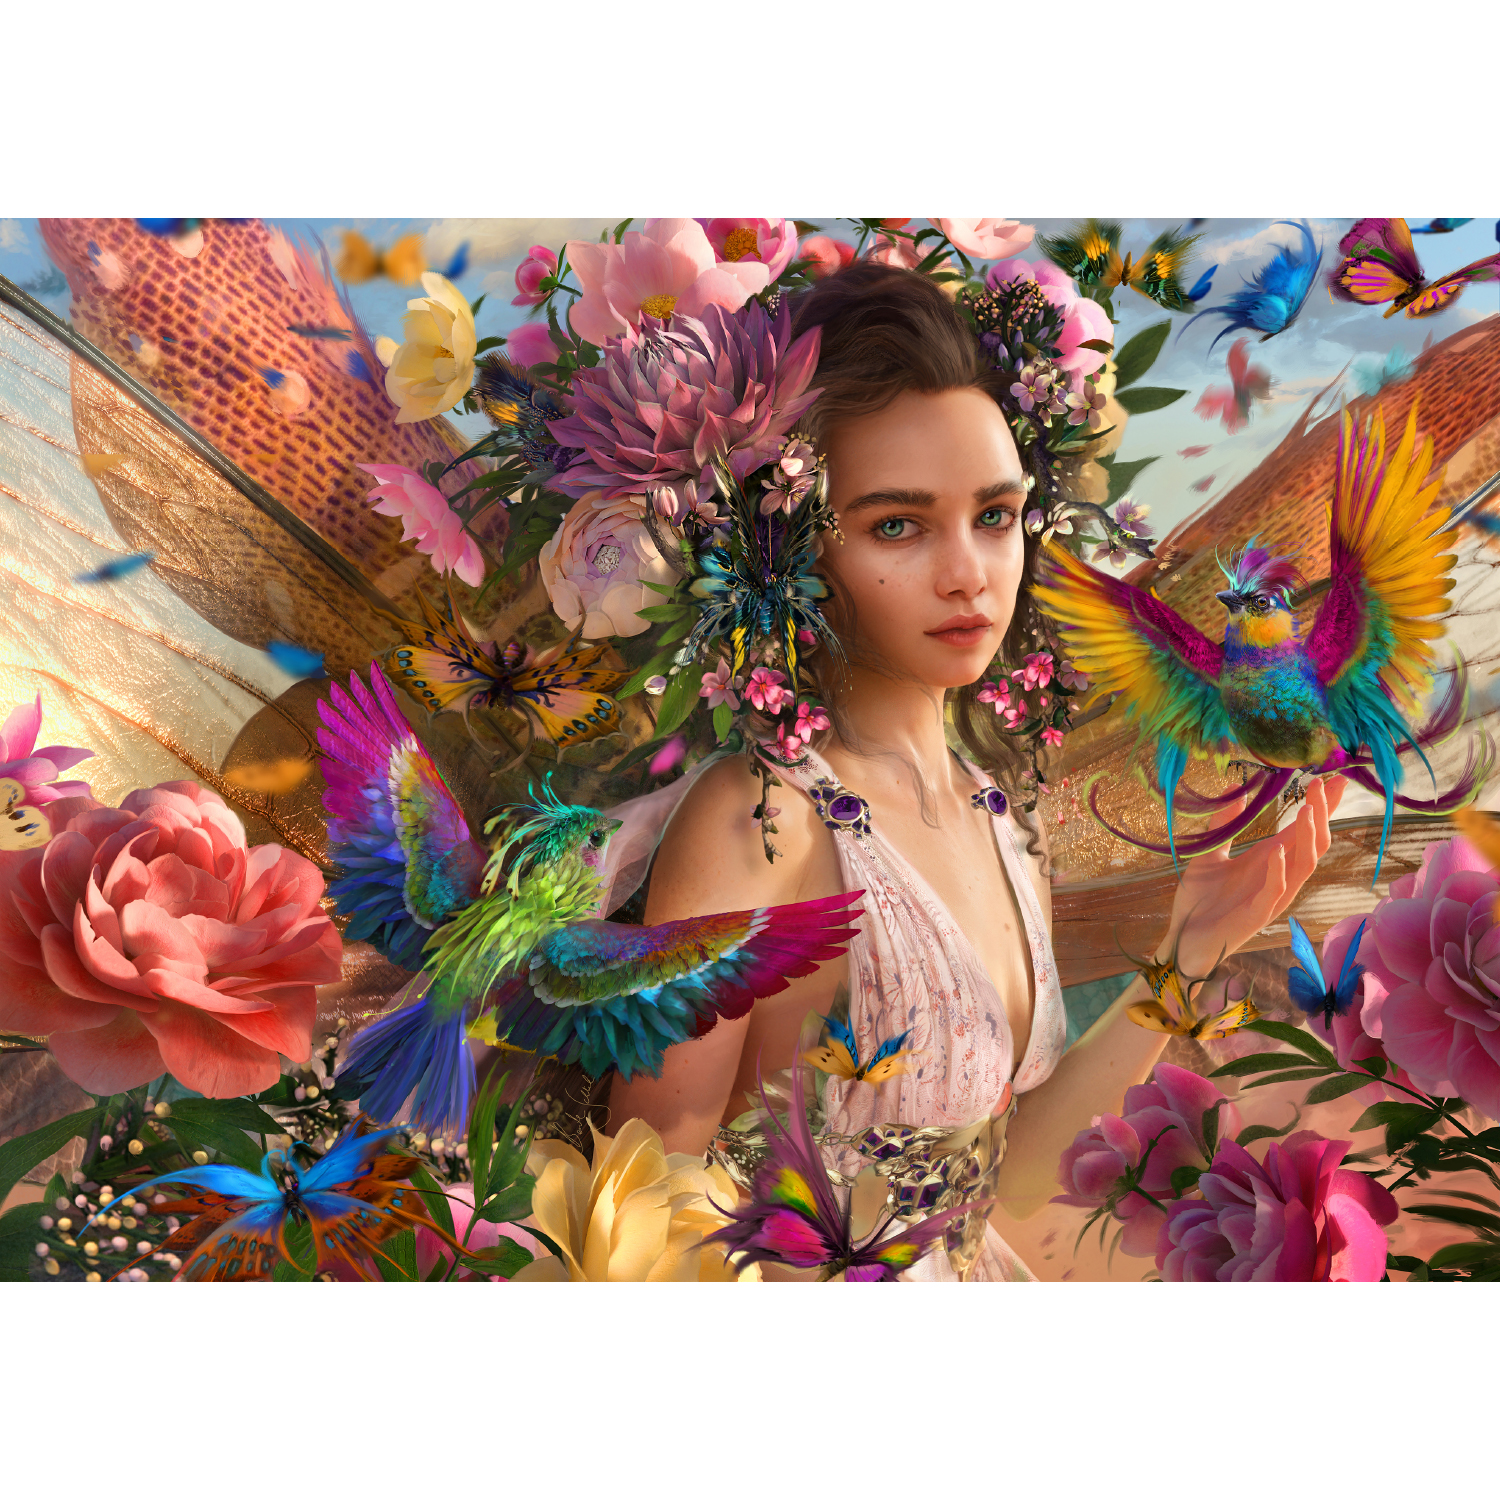 fairy princess surrounded by birds and flowers